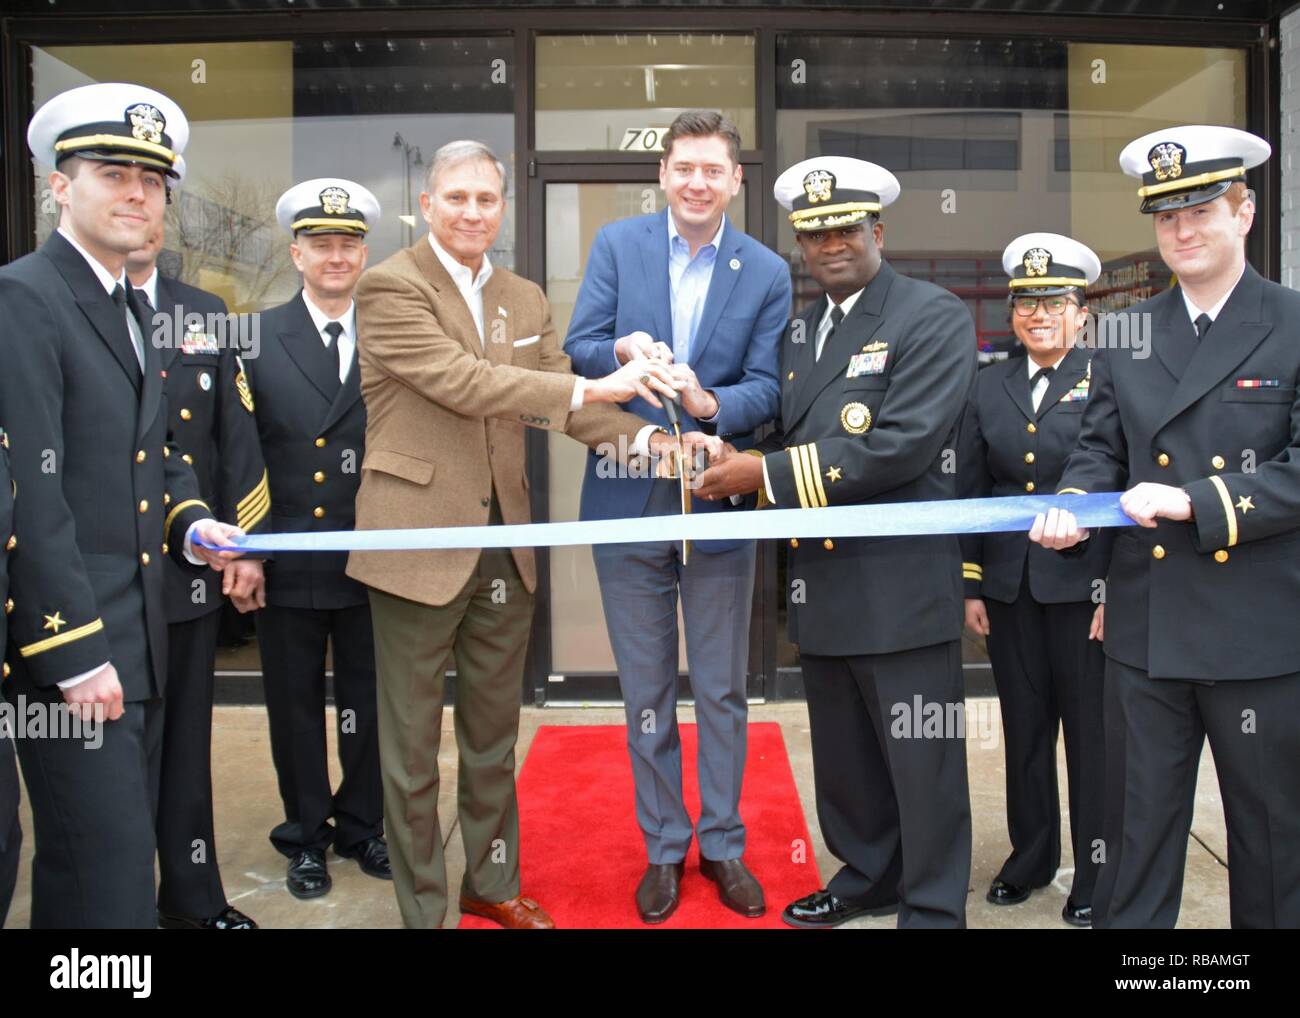 OKLAHOMA CITY (Dec. 27, 2018) Assistant Secretary of the Navy (Manpower and Reserve Affairs), retired Rear Adm. Gregory J. Slovonic, left, Mayor of Oklahoma City, David Holt, center, and Cmdr. Brock Miller, commanding officer Navy Recruiting District Dallas, launch the grand opening of Navy Officer Recruiting Station (NORS) Oklahoma during a ribbon cutting ceremony. NORS Oklahoma is the first and only Navy Officer Recruiting Station in the state and is assigned to Navy Recruiting District (NRD) Dallas. Stock Photo